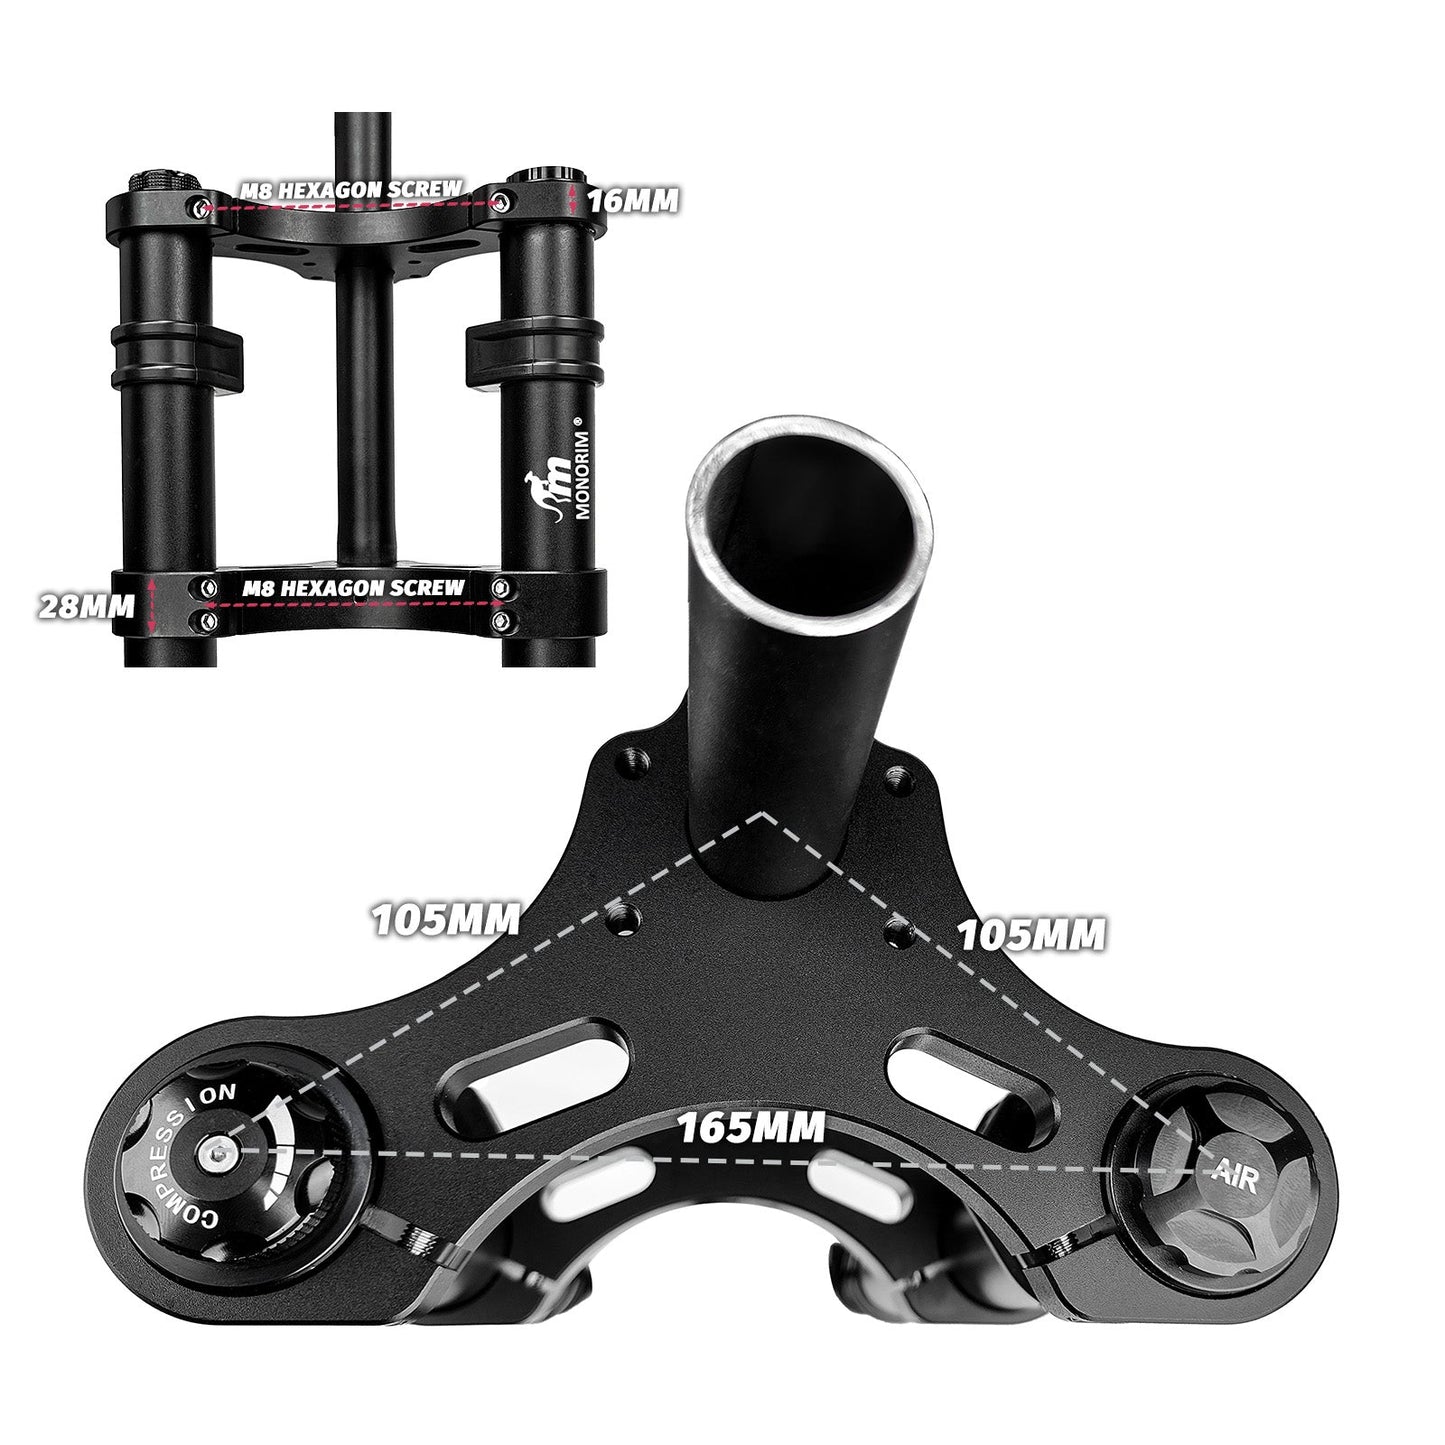 Monorim MD0-14inch front suspension modify great kit to be more safety and comfort for DYU A5 ebike ：